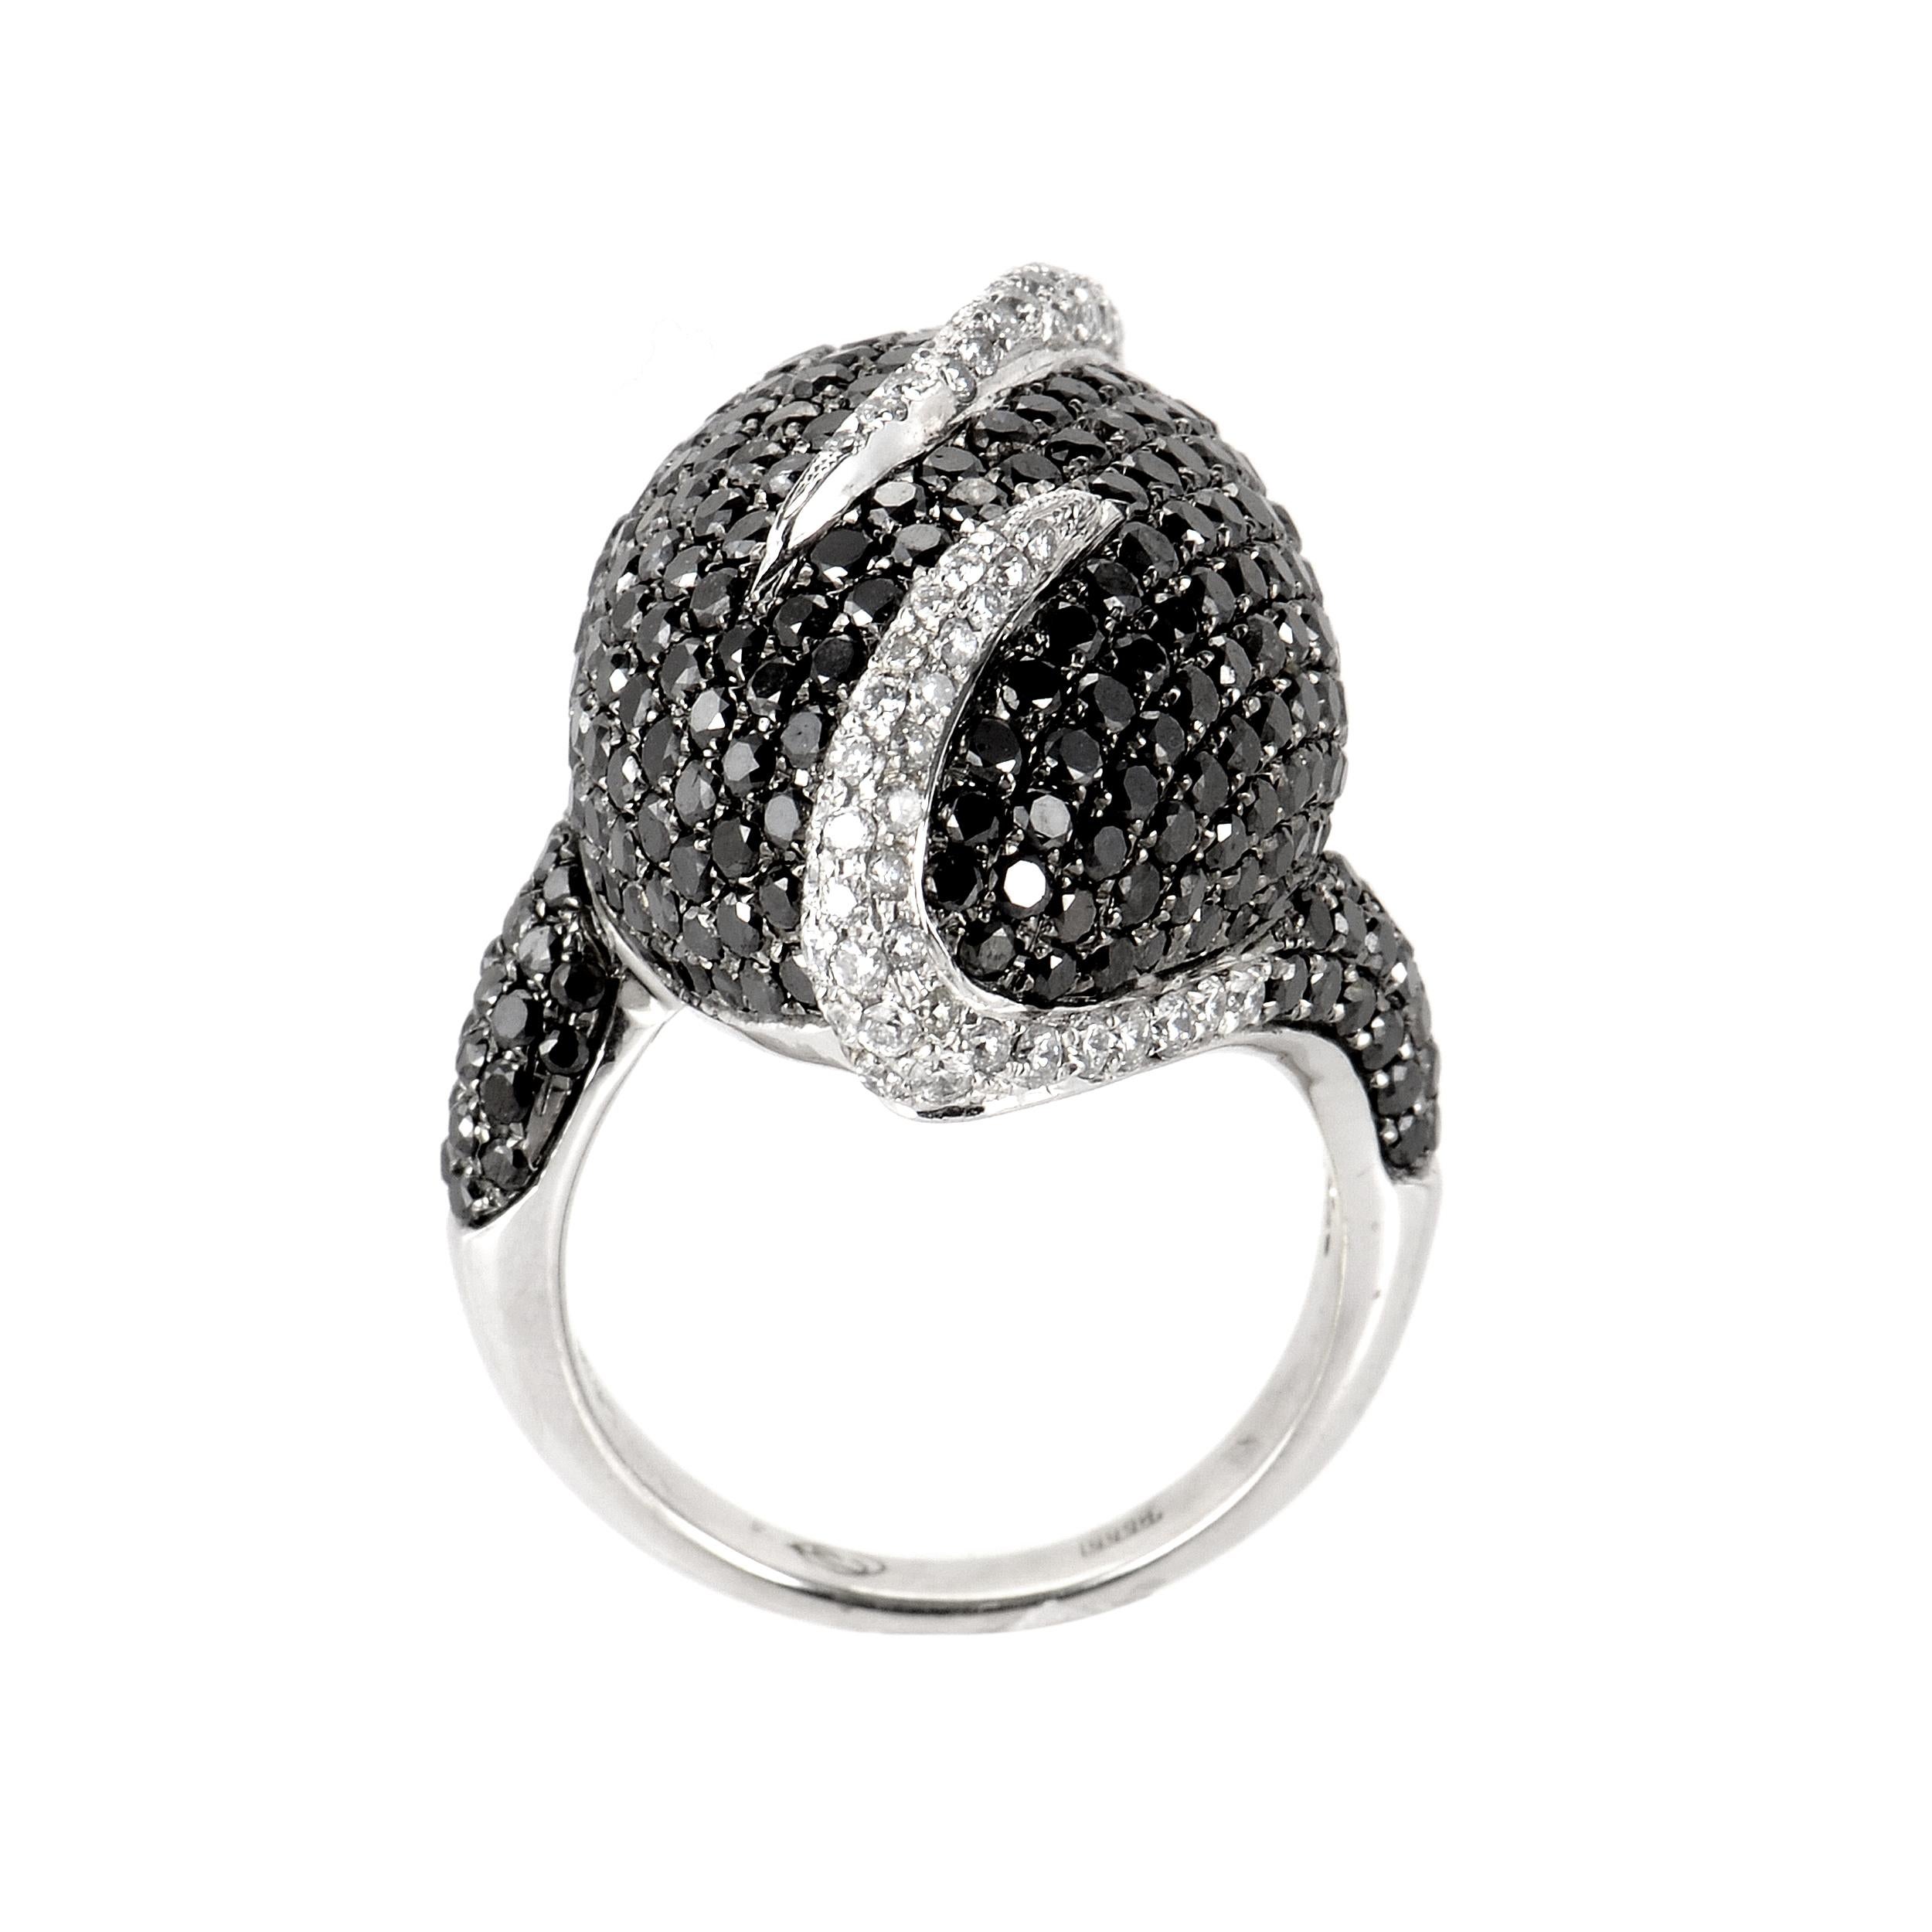 This ring is opulent and shines with diamonds. The setting is made of 18K white gold and boasts a design of ~5.15ct of black and white diamonds. 
Ring Size: 6.5